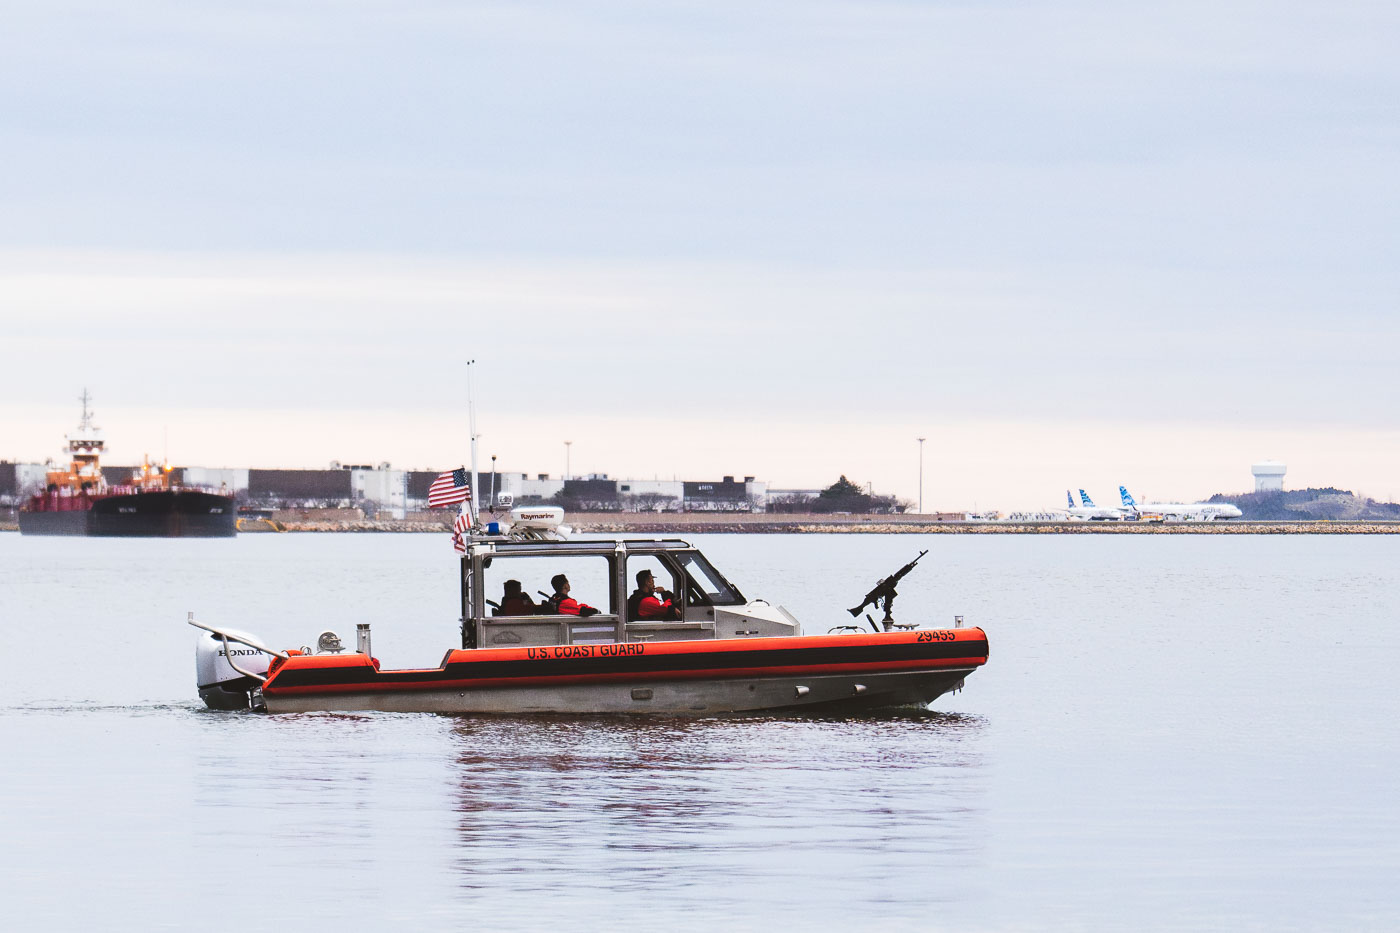 Coast Guard boat with mounted weapon